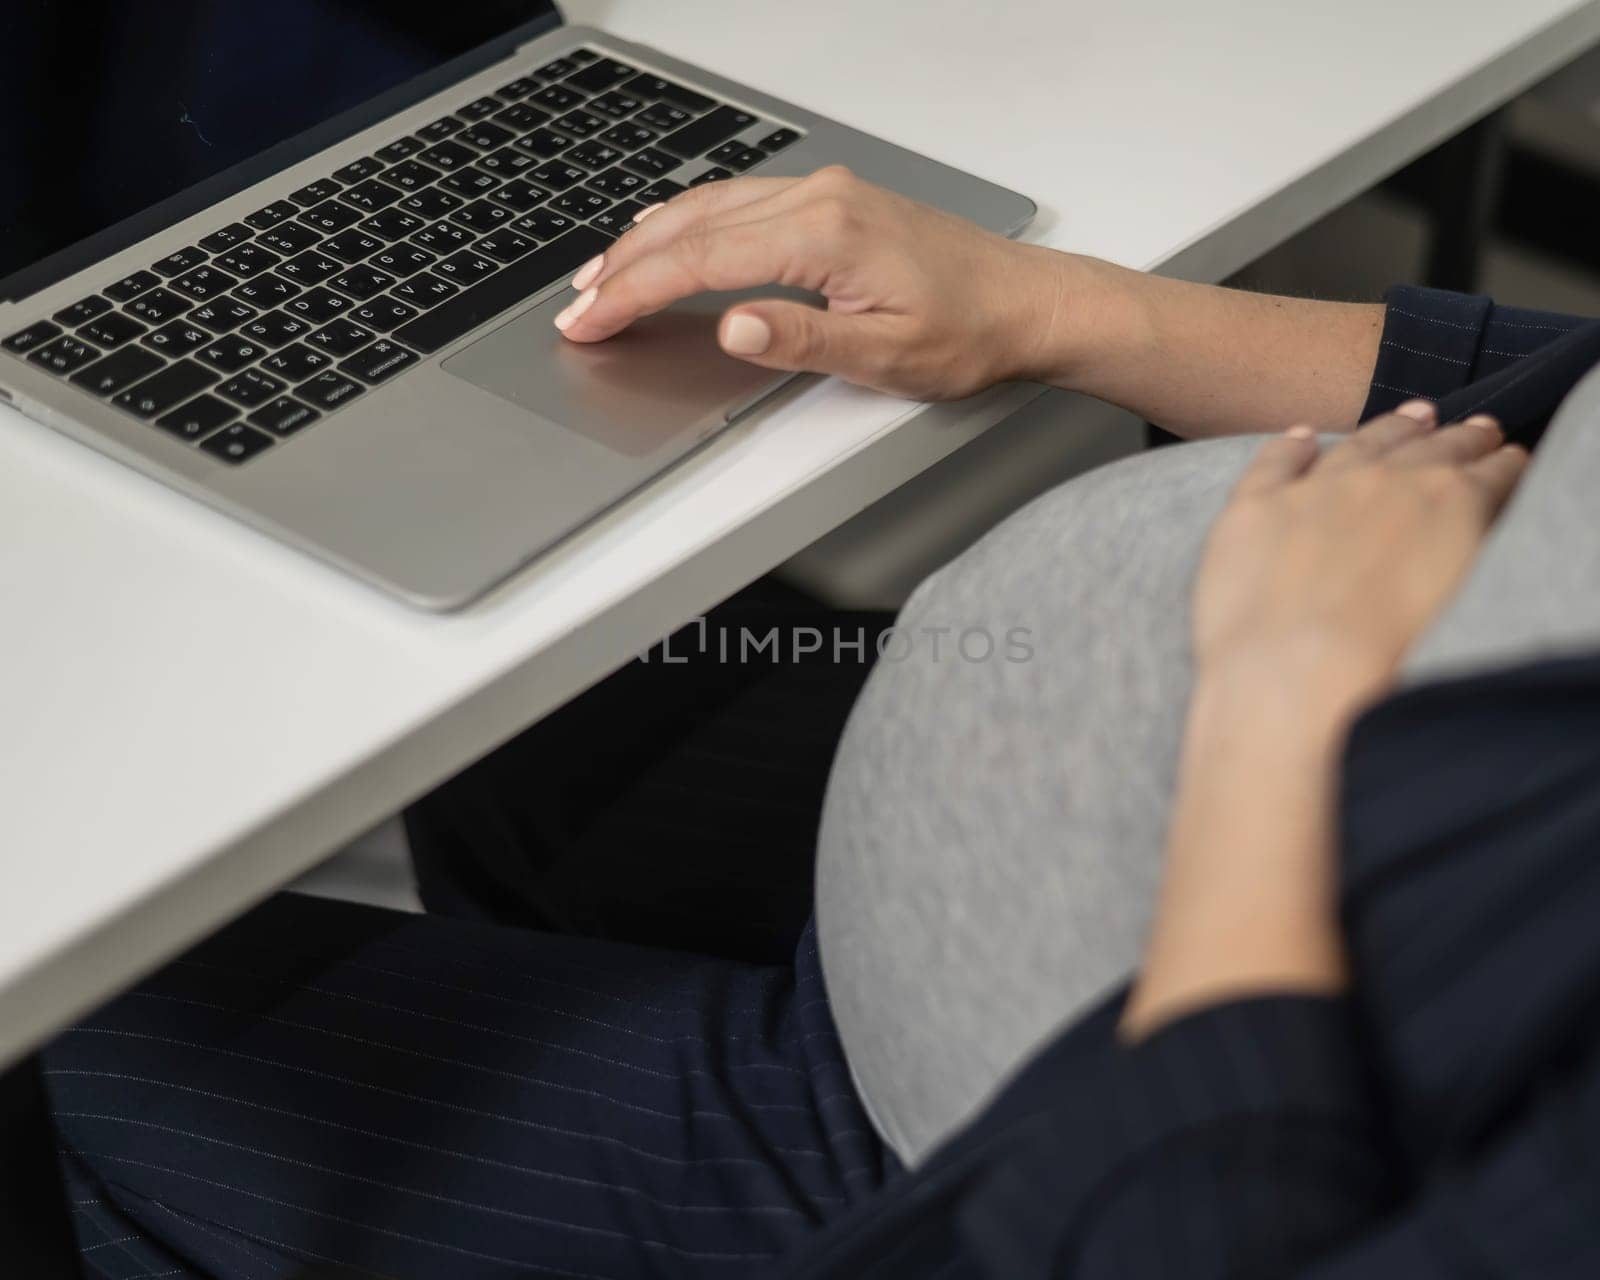 A pregnant woman works on a laptop in the office. Close-up of the tummy